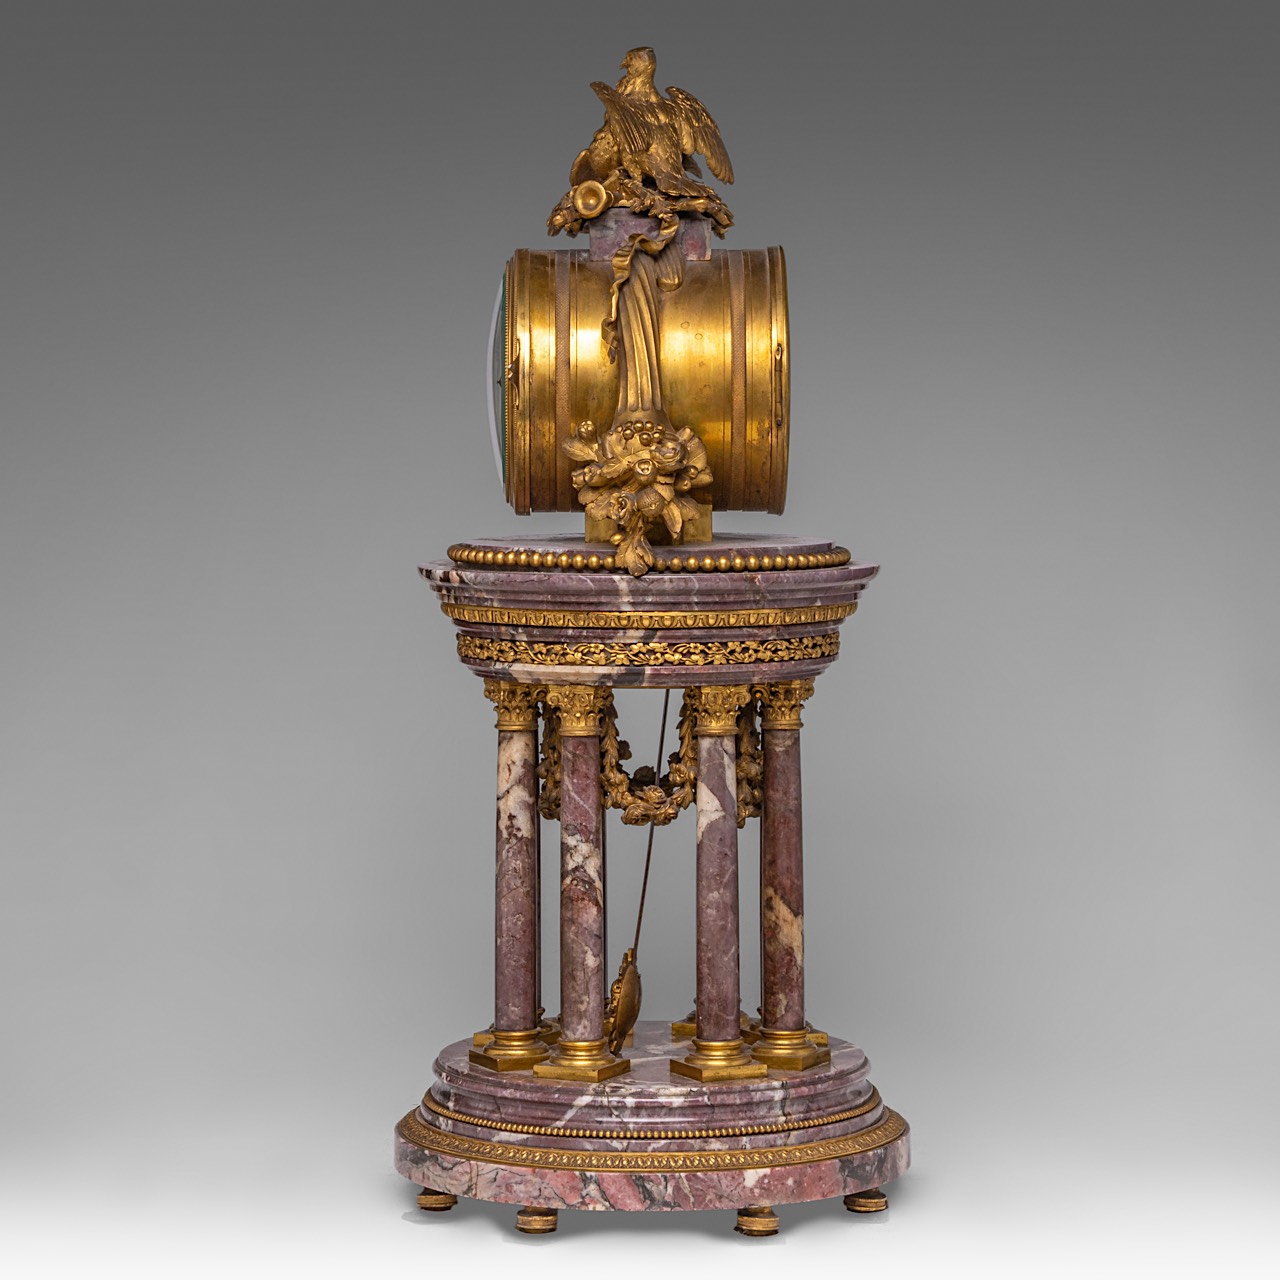 A Louis XVI style gilt bronze mounted marble portico clock, late 19thC, H 63 cm - Image 4 of 6